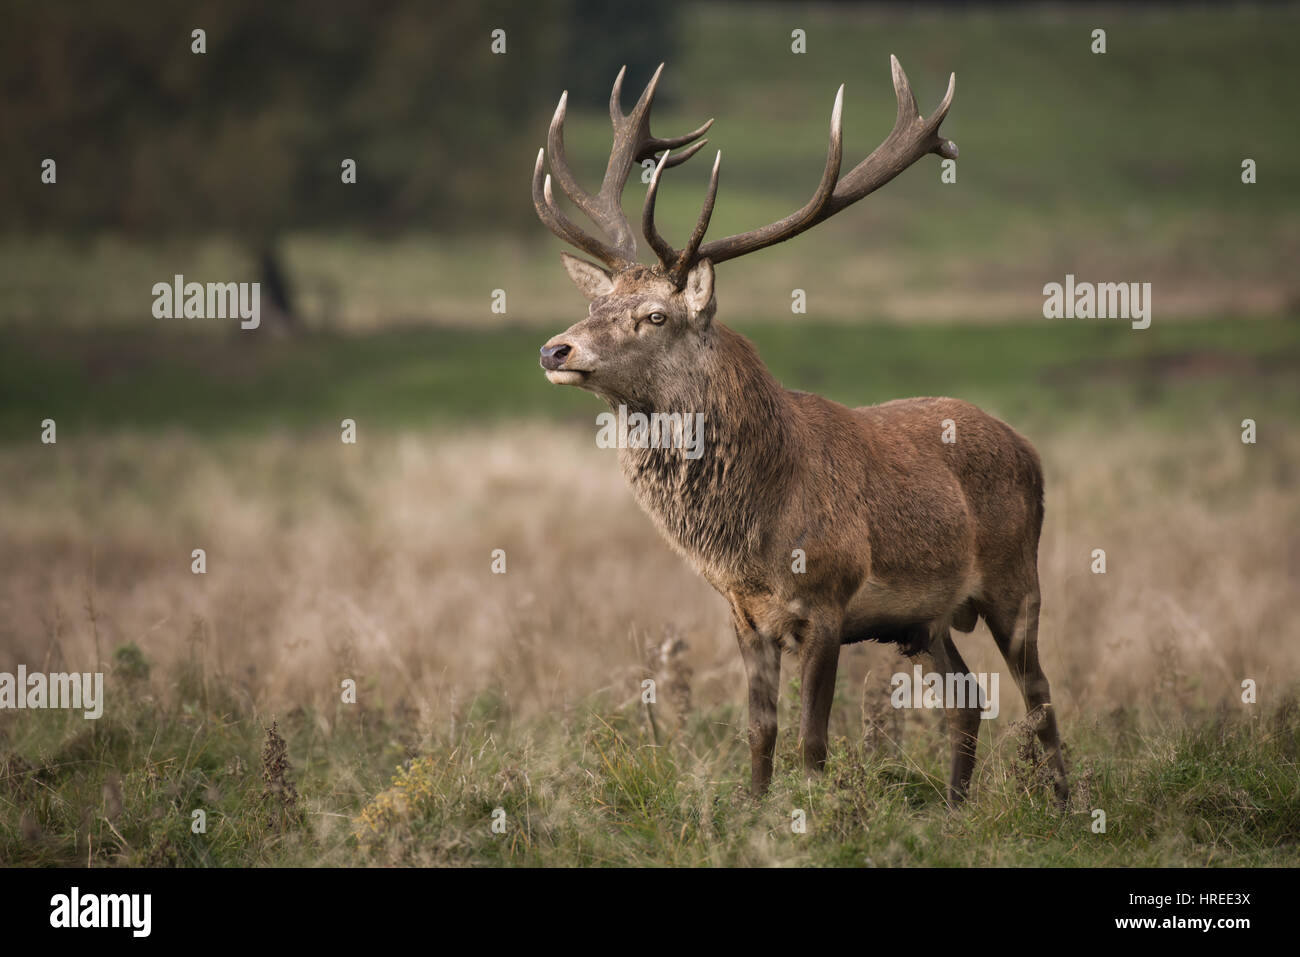 A full length portrait of a solitary red deer stag standing in open grassland Stock Photo